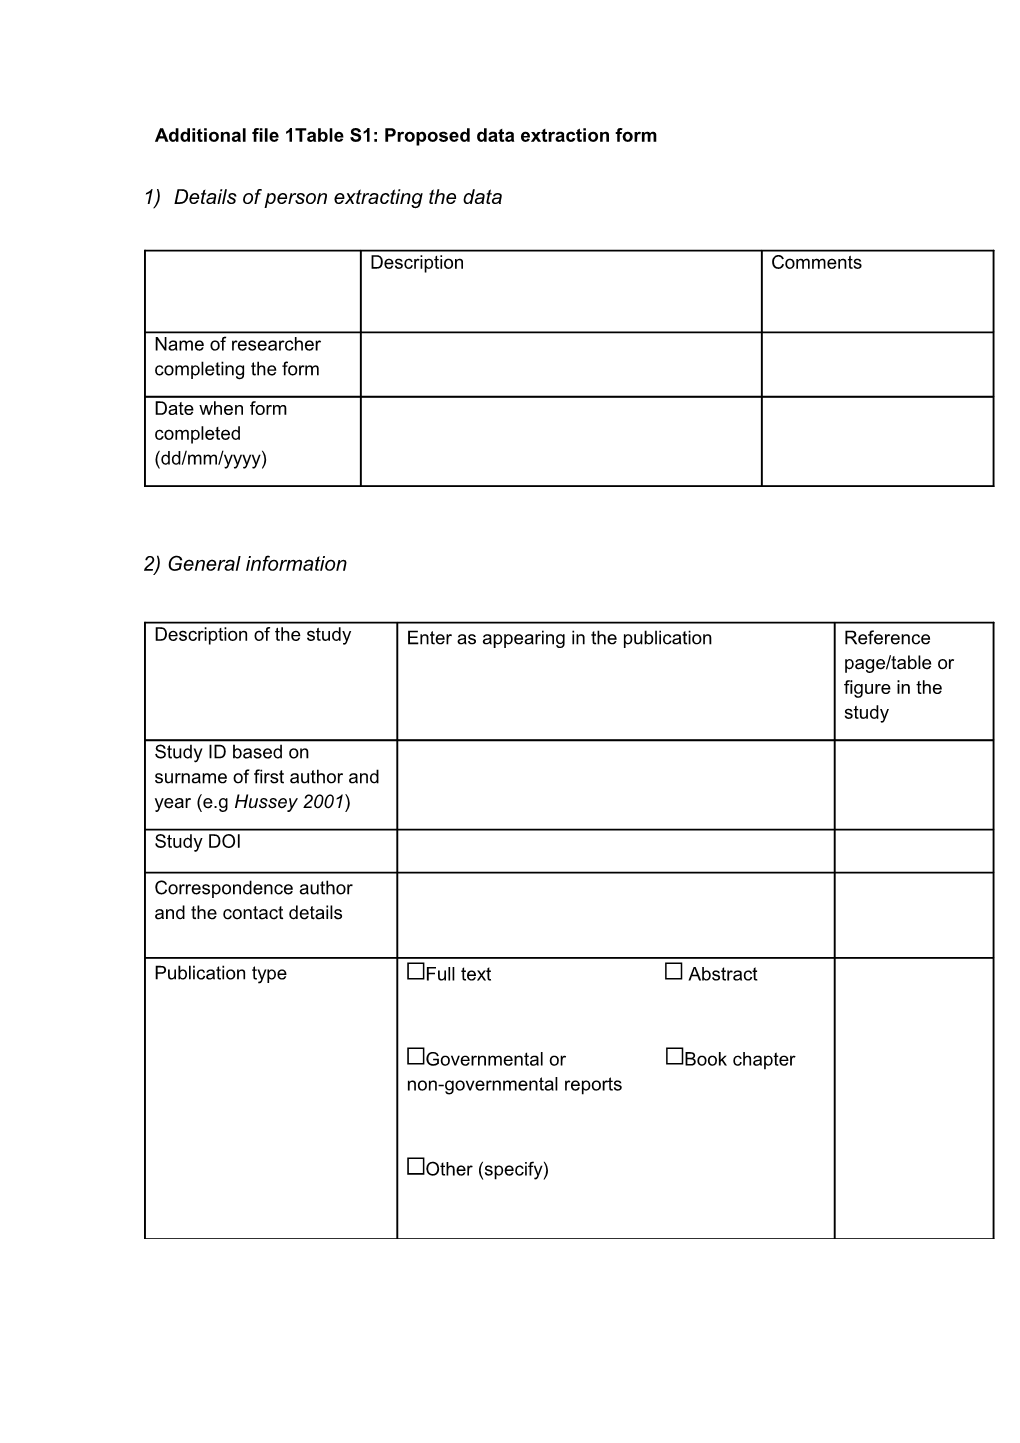 Additional File 1Table S1: Proposed Data Extraction Form